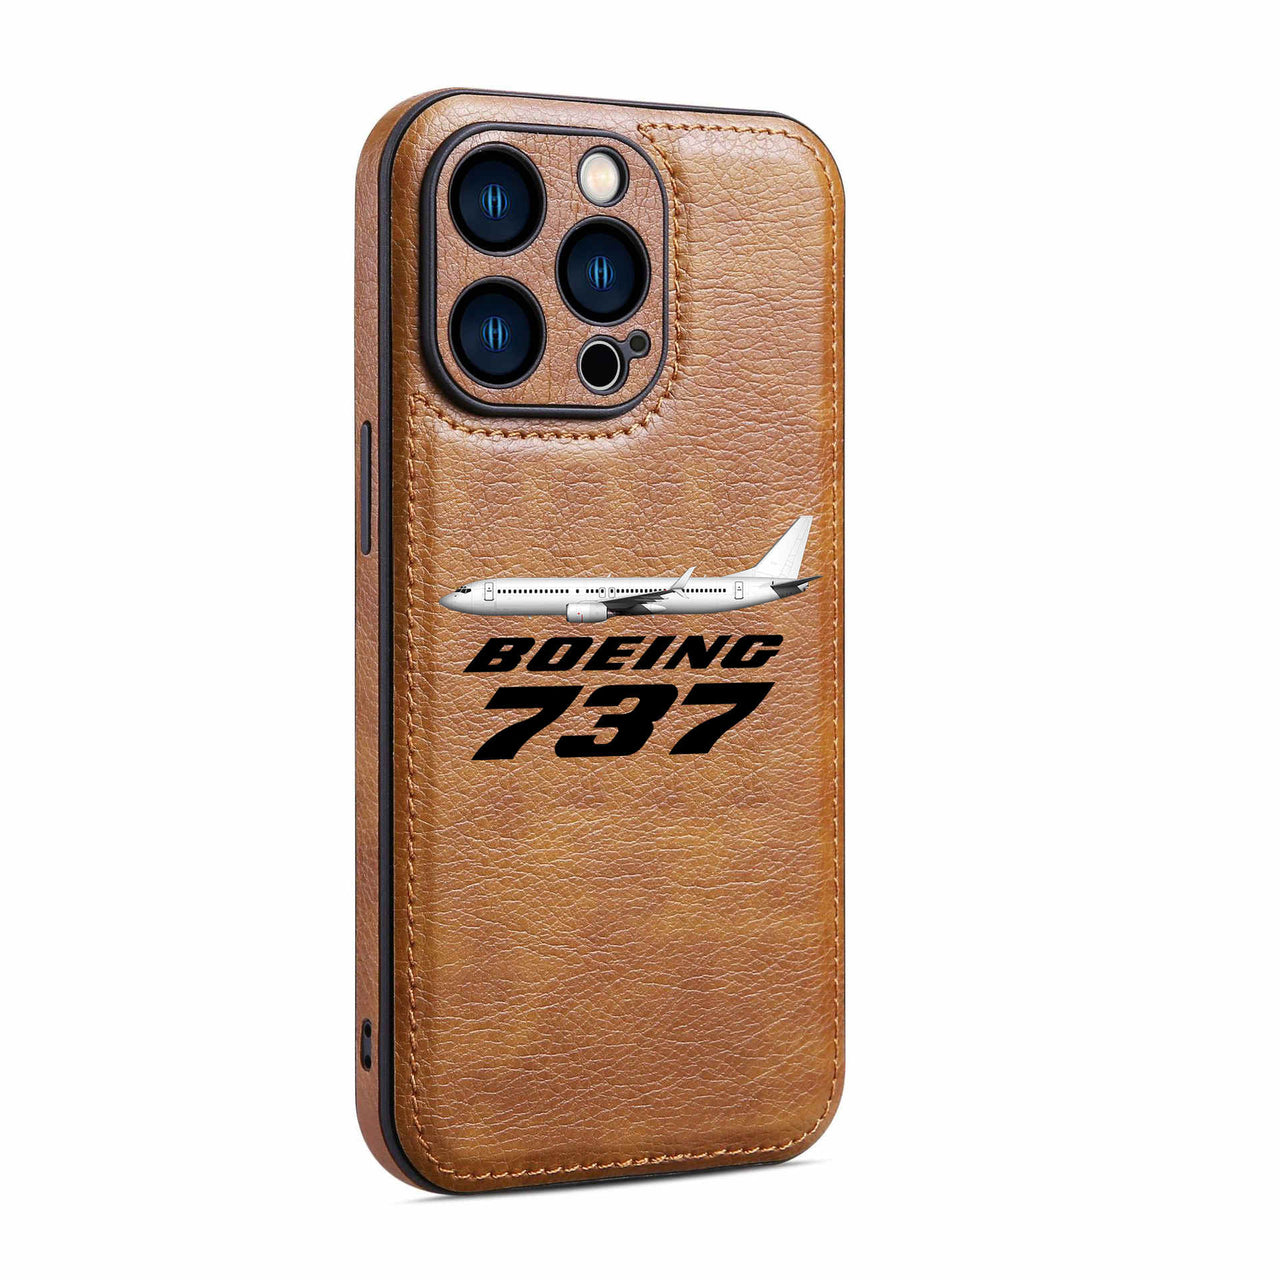 The Boeing 737 Designed Leather iPhone Cases